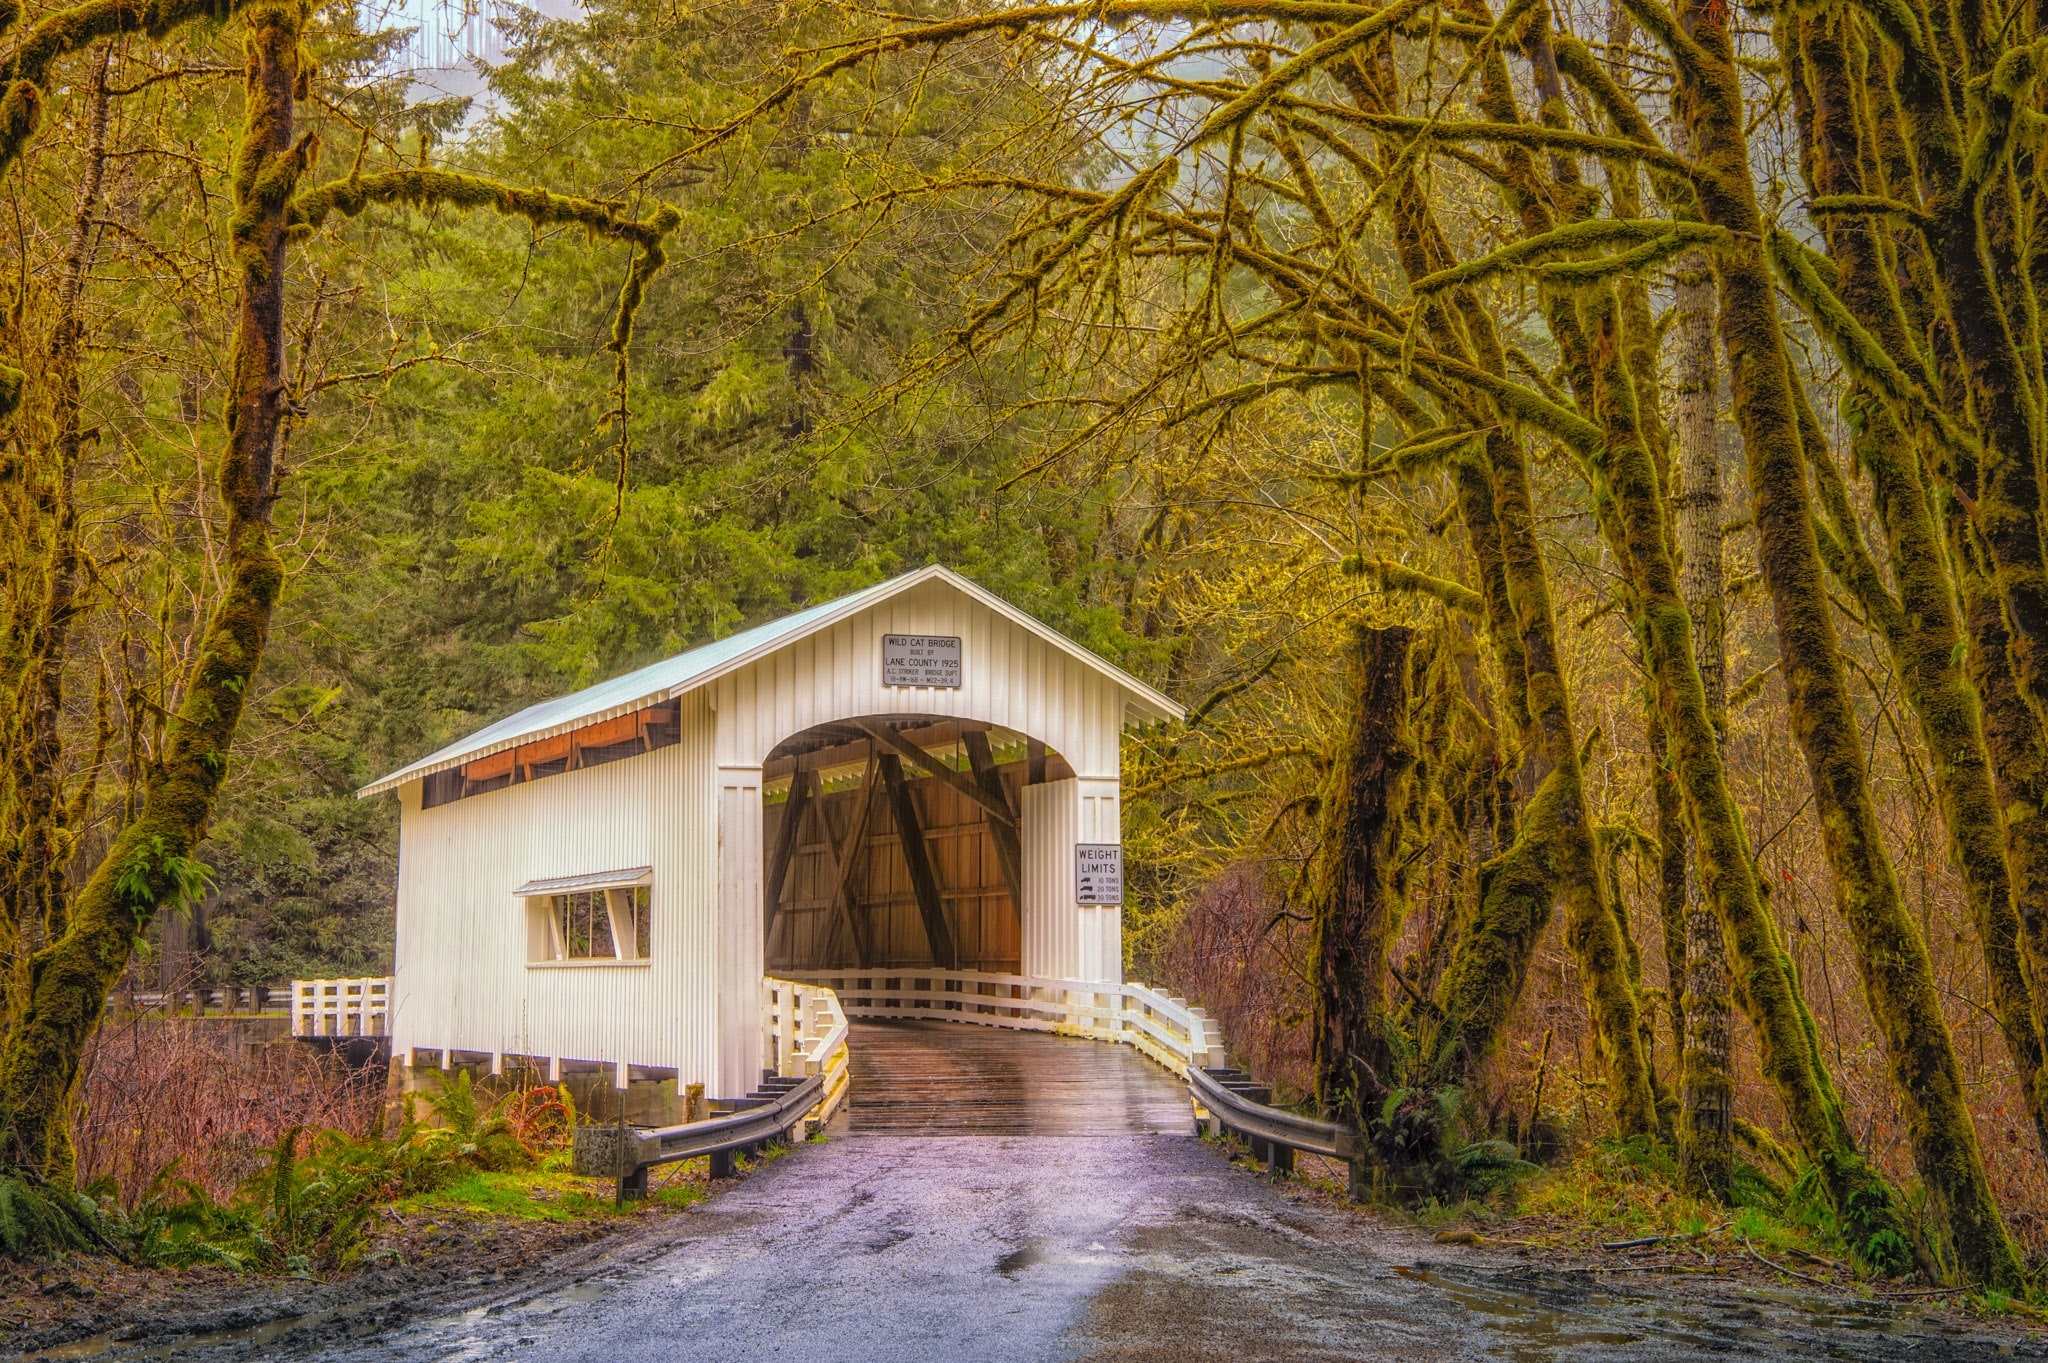 Wildcat Creek Covered Bridge was built in 1925 near the confluence of Wildcat Creek and the Suislaw River, 27 miles east of Florence, Oregon.